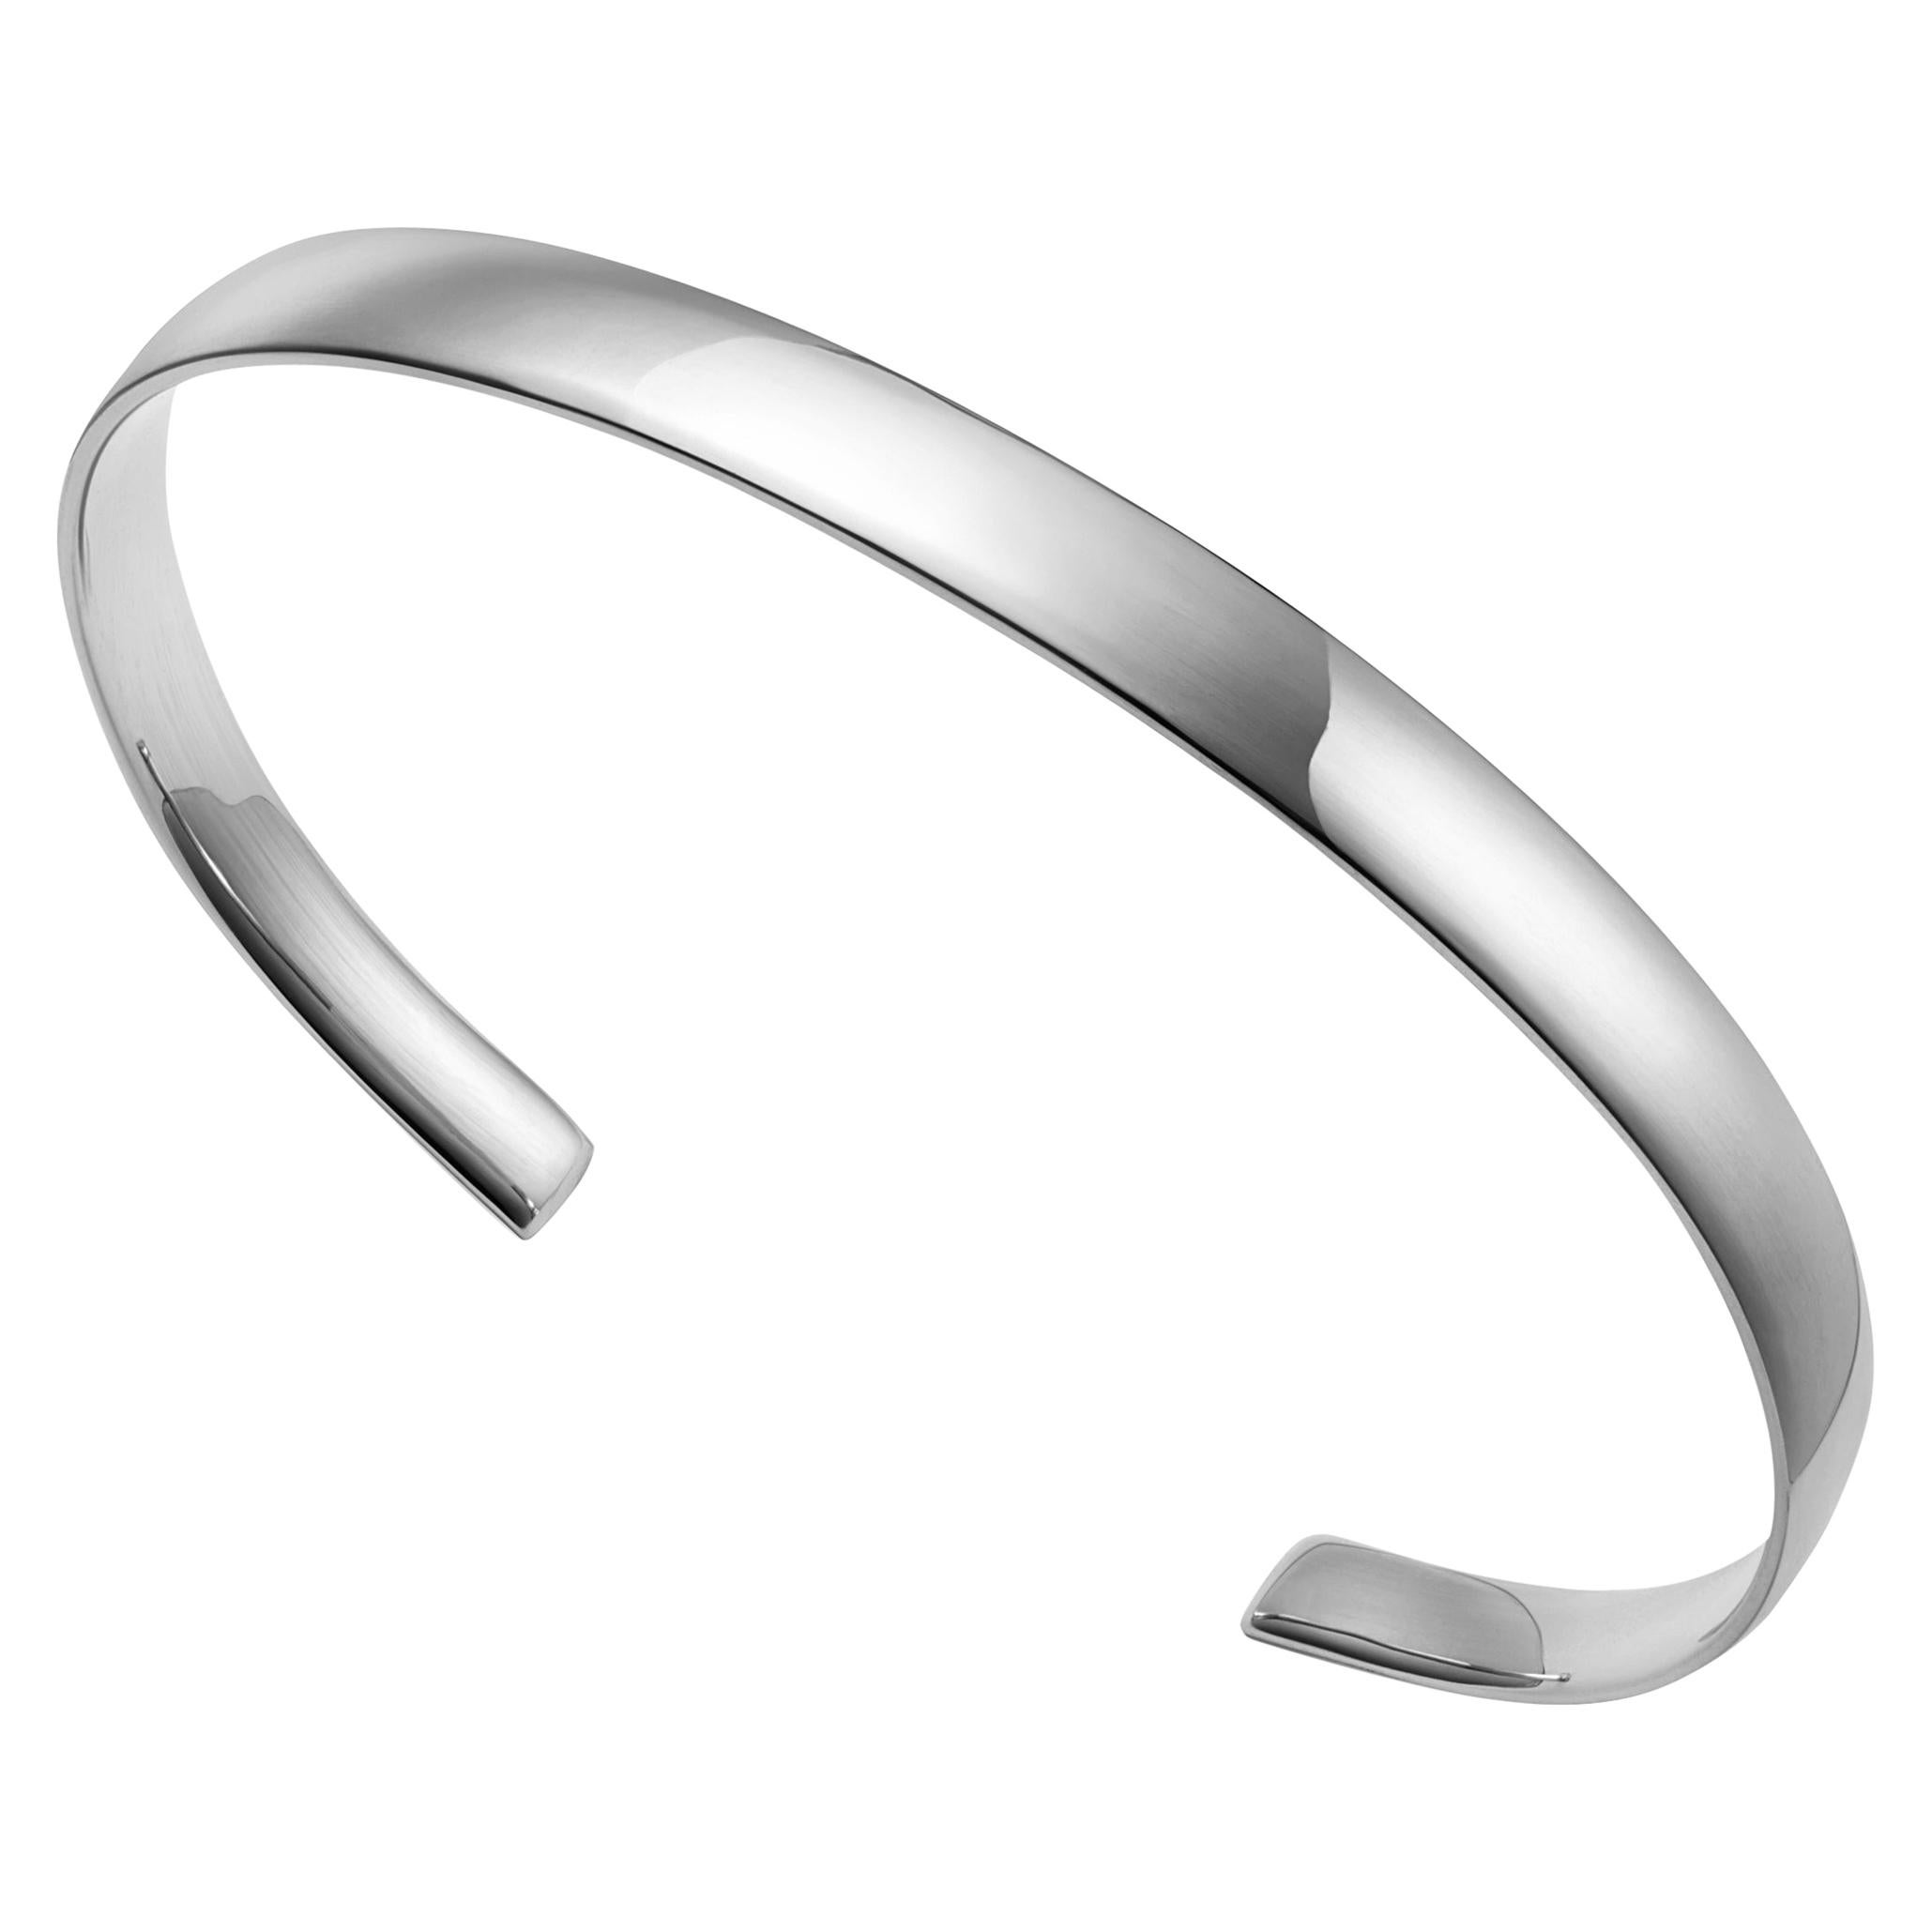 18kt Fairmined Ecological White Gold Classic Round Sincerity Cuff Bracelet